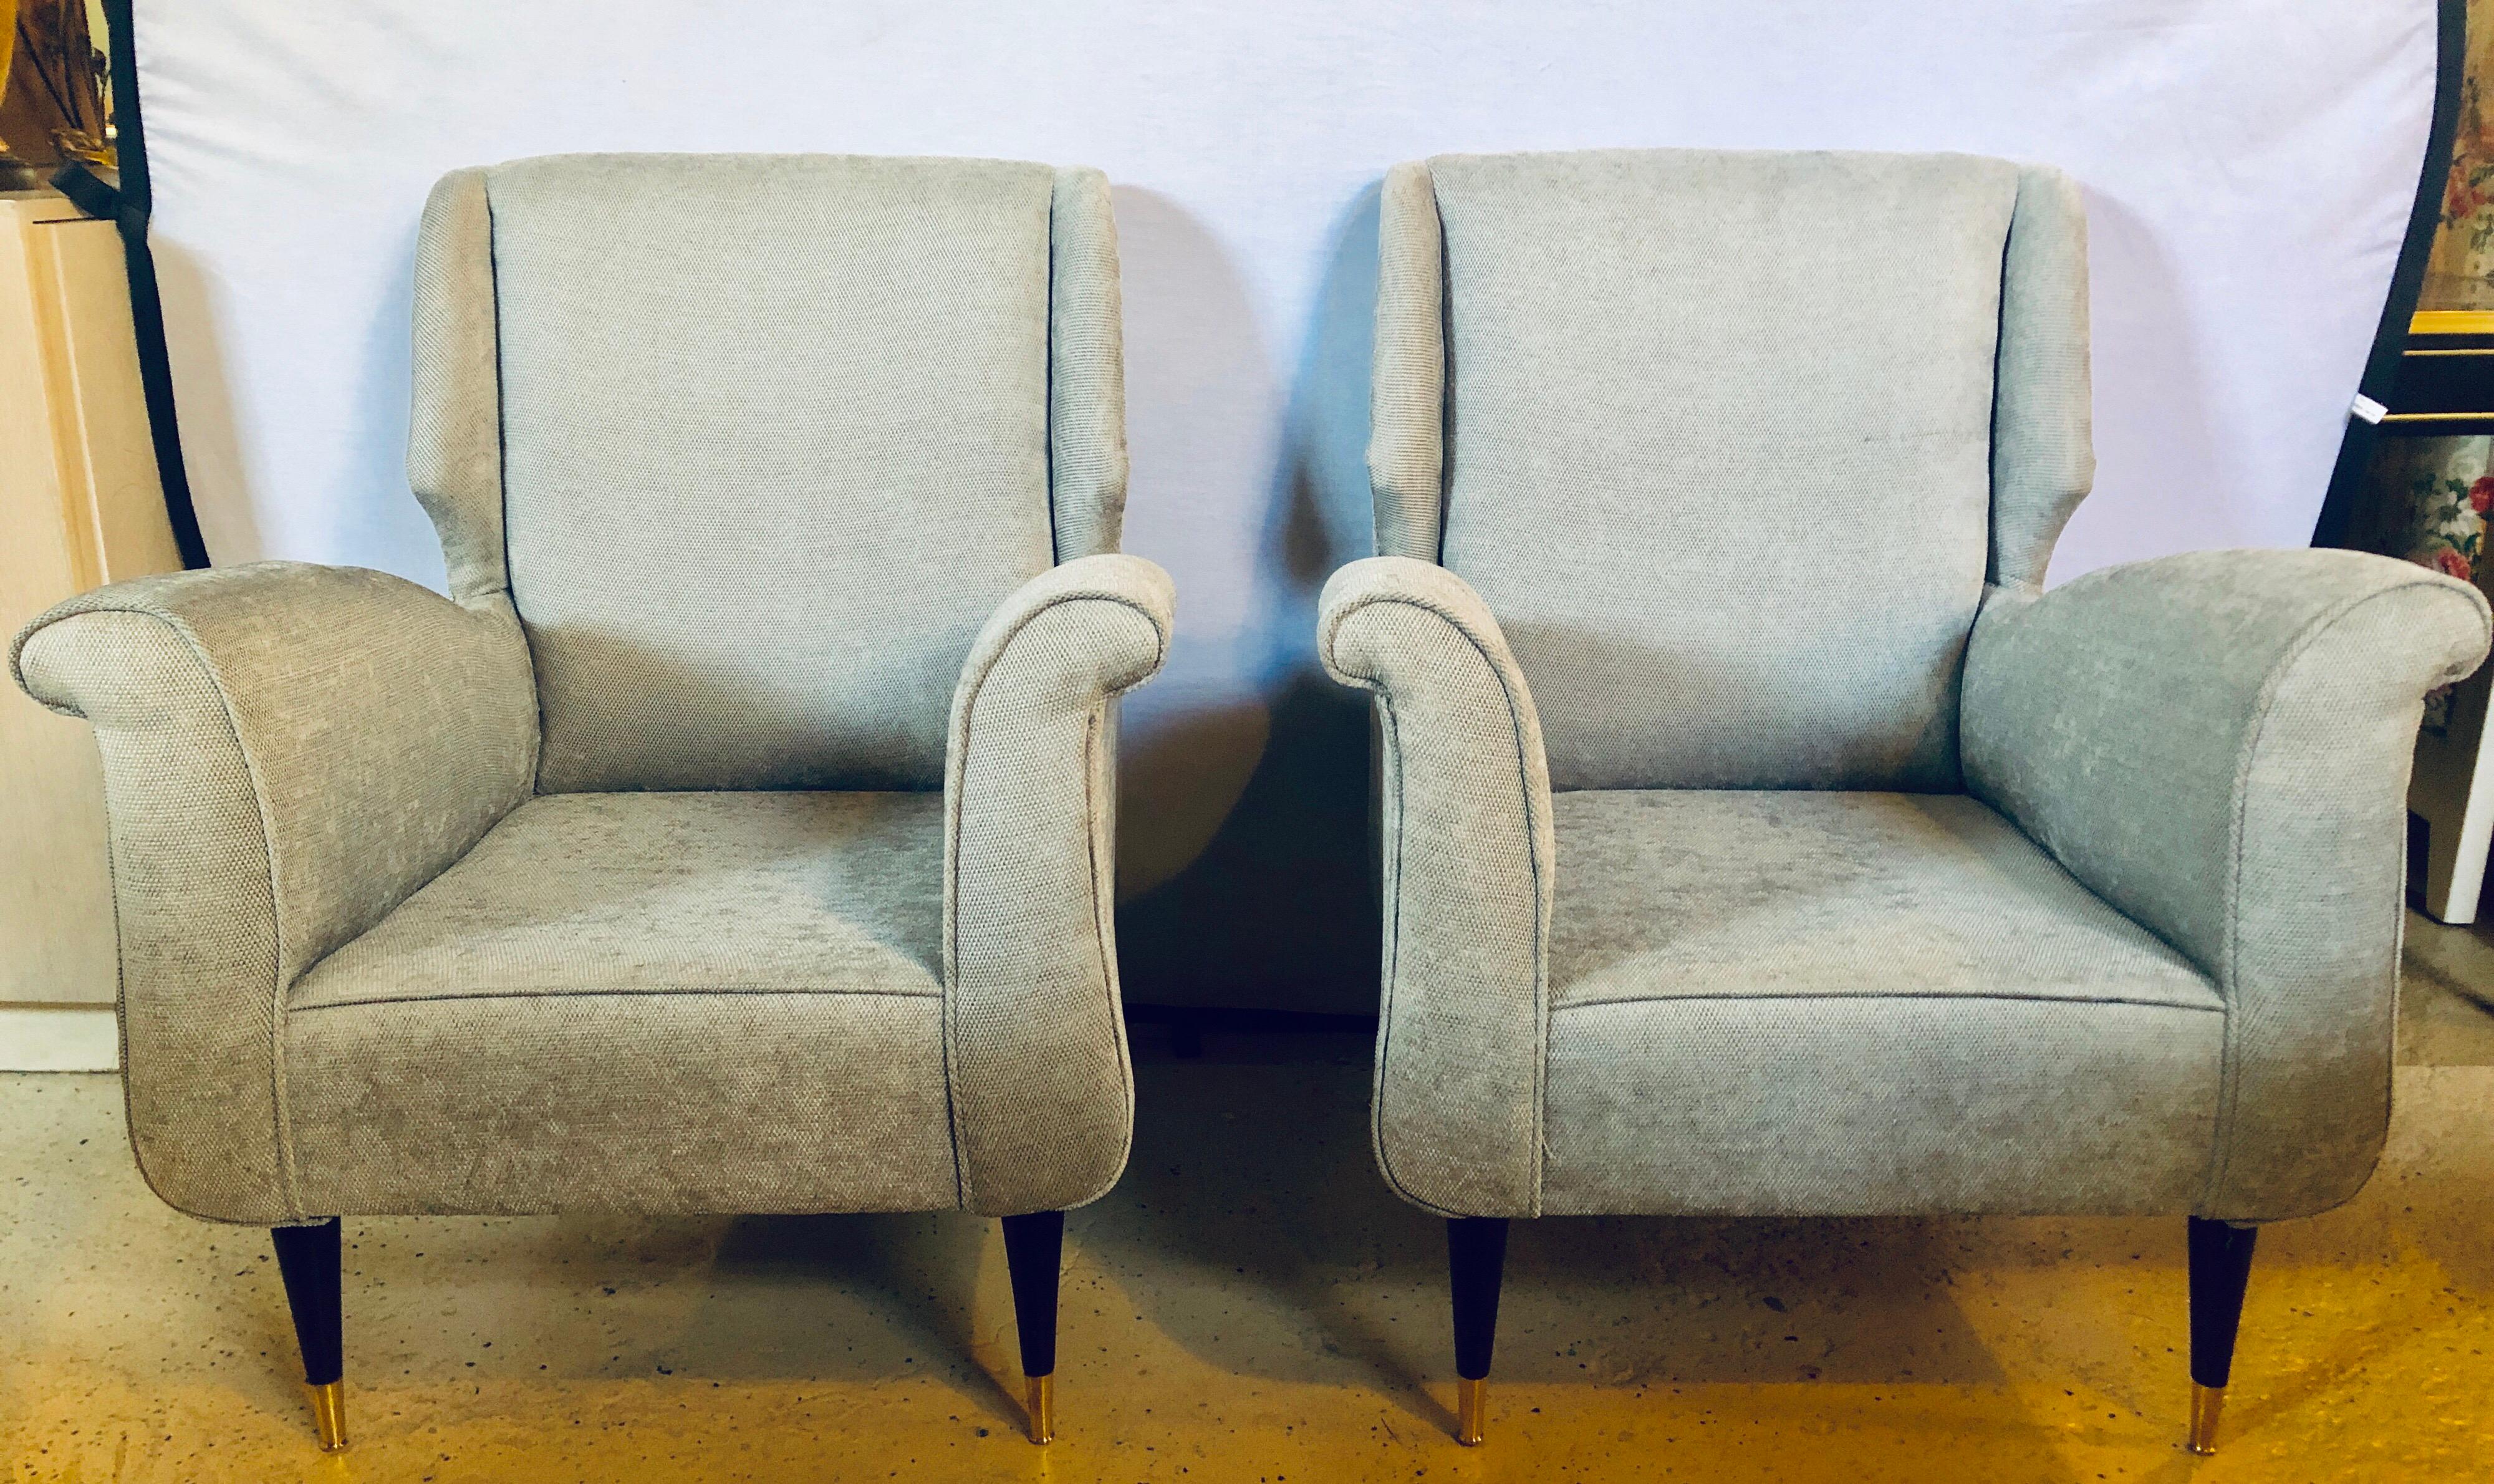 Pair of Mid-Century Modern Gio Ponti style arm or wing back chairs. These finely detailed sleek and stylish armchairs depict this iconic designer’s style for flair and simplicity at his highest level. The tapering mahogany legs sitting on brass